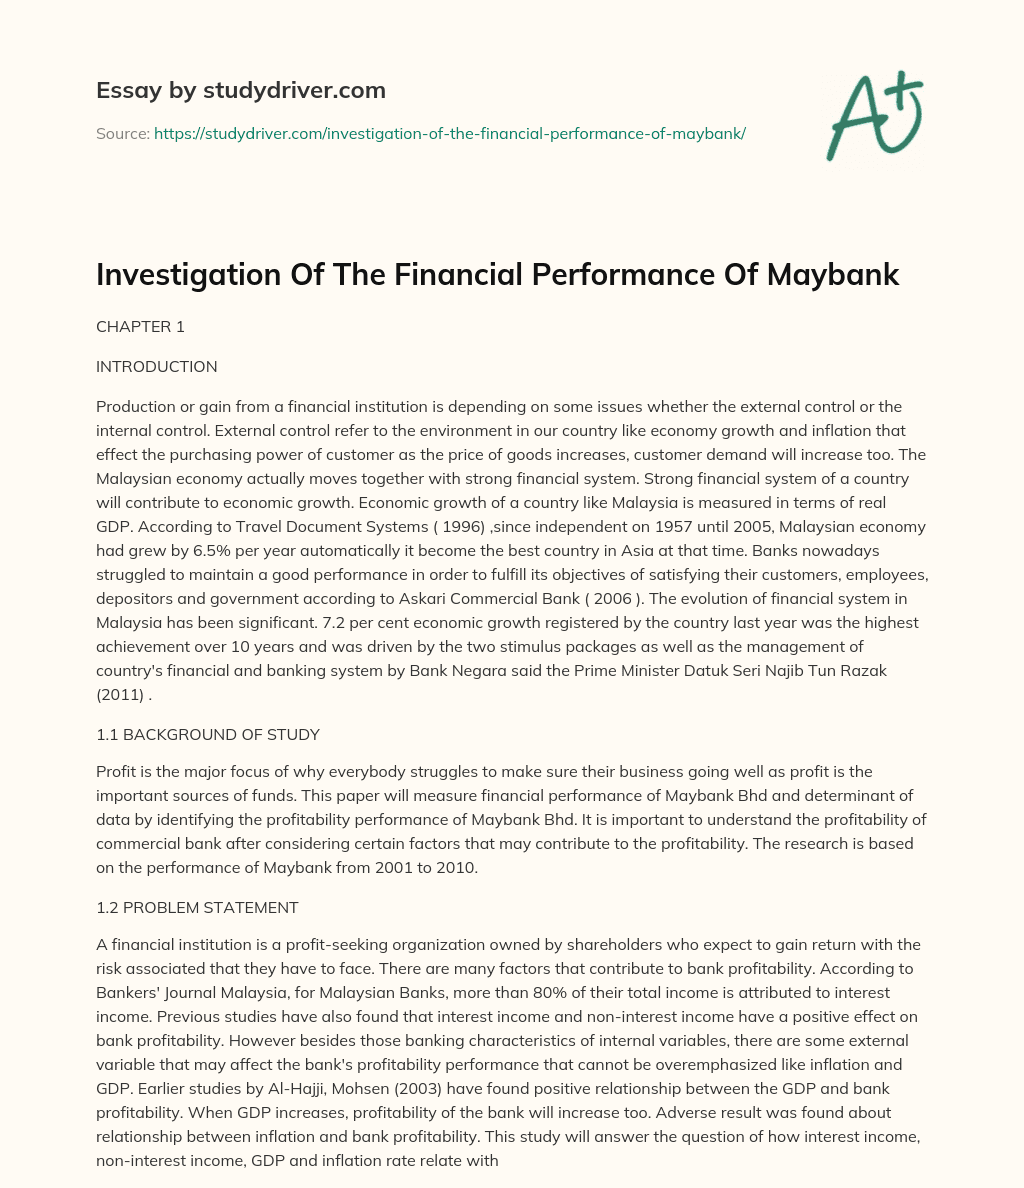 Investigation of the Financial Performance of Maybank essay